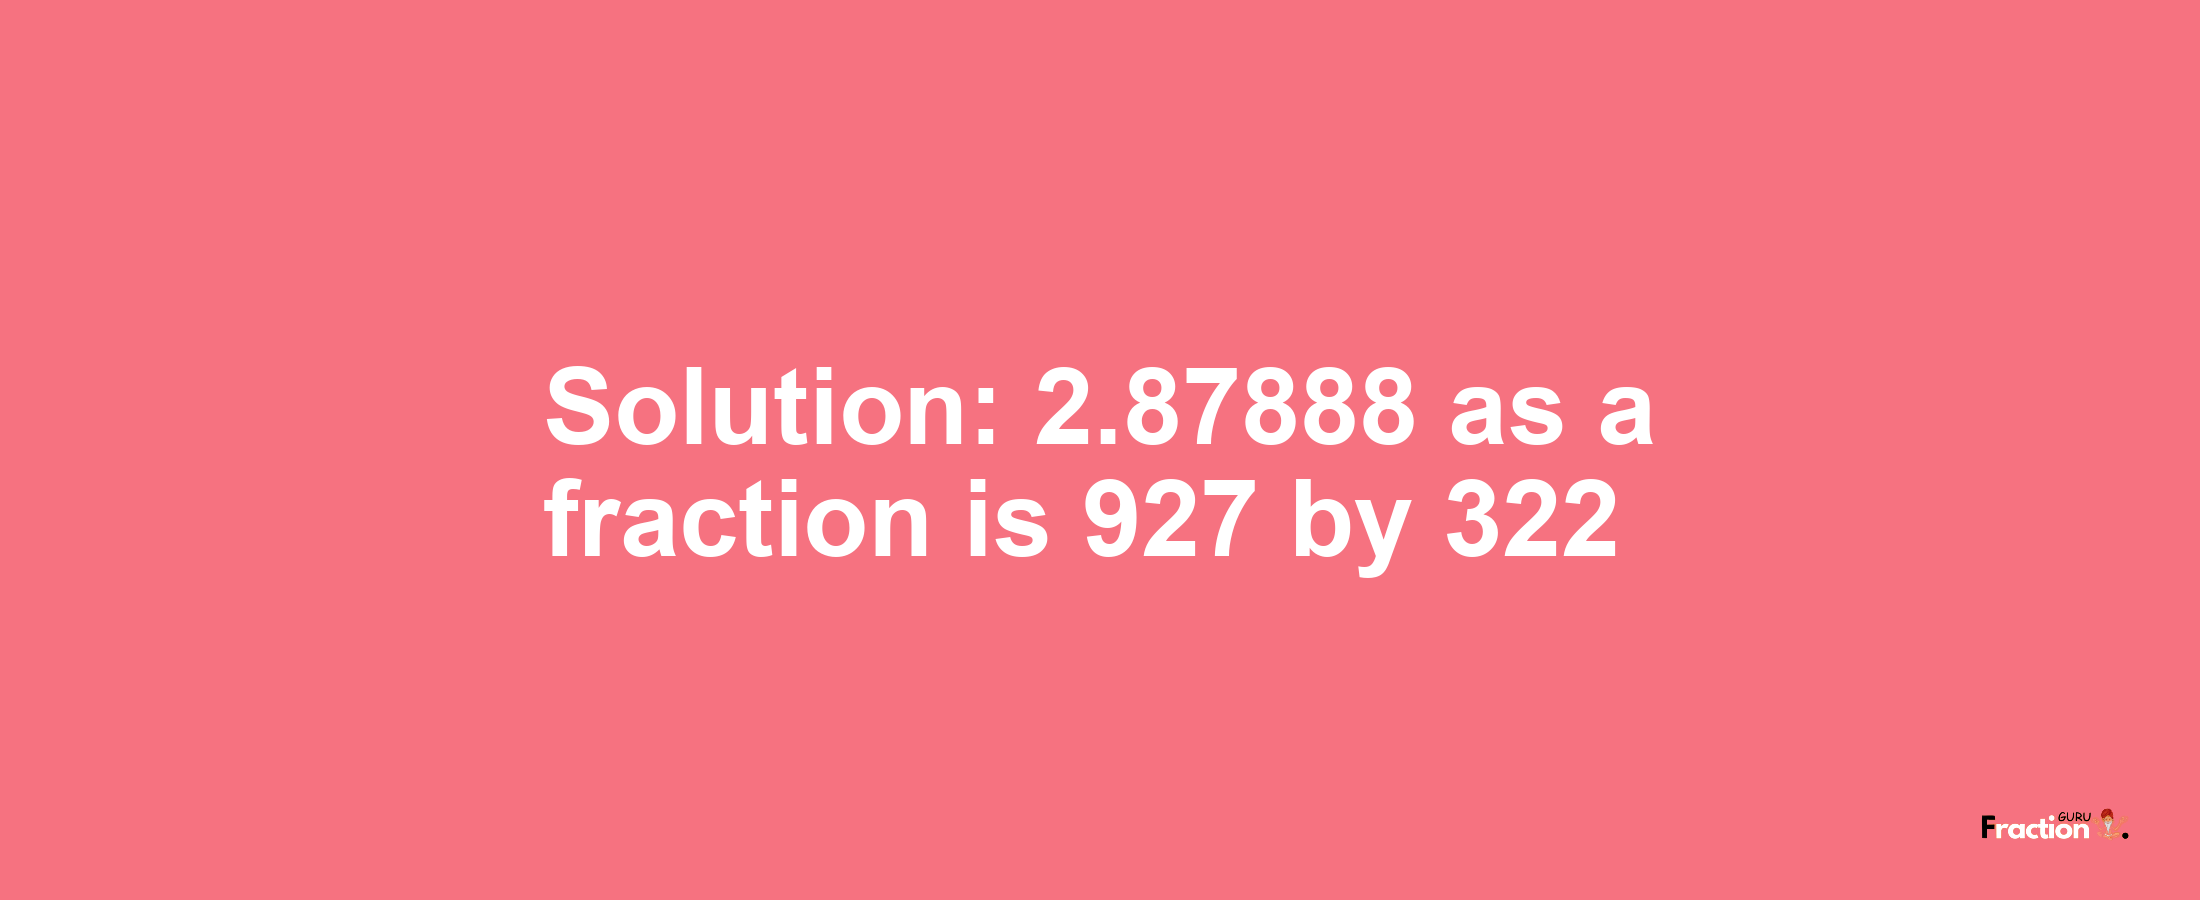 Solution:2.87888 as a fraction is 927/322